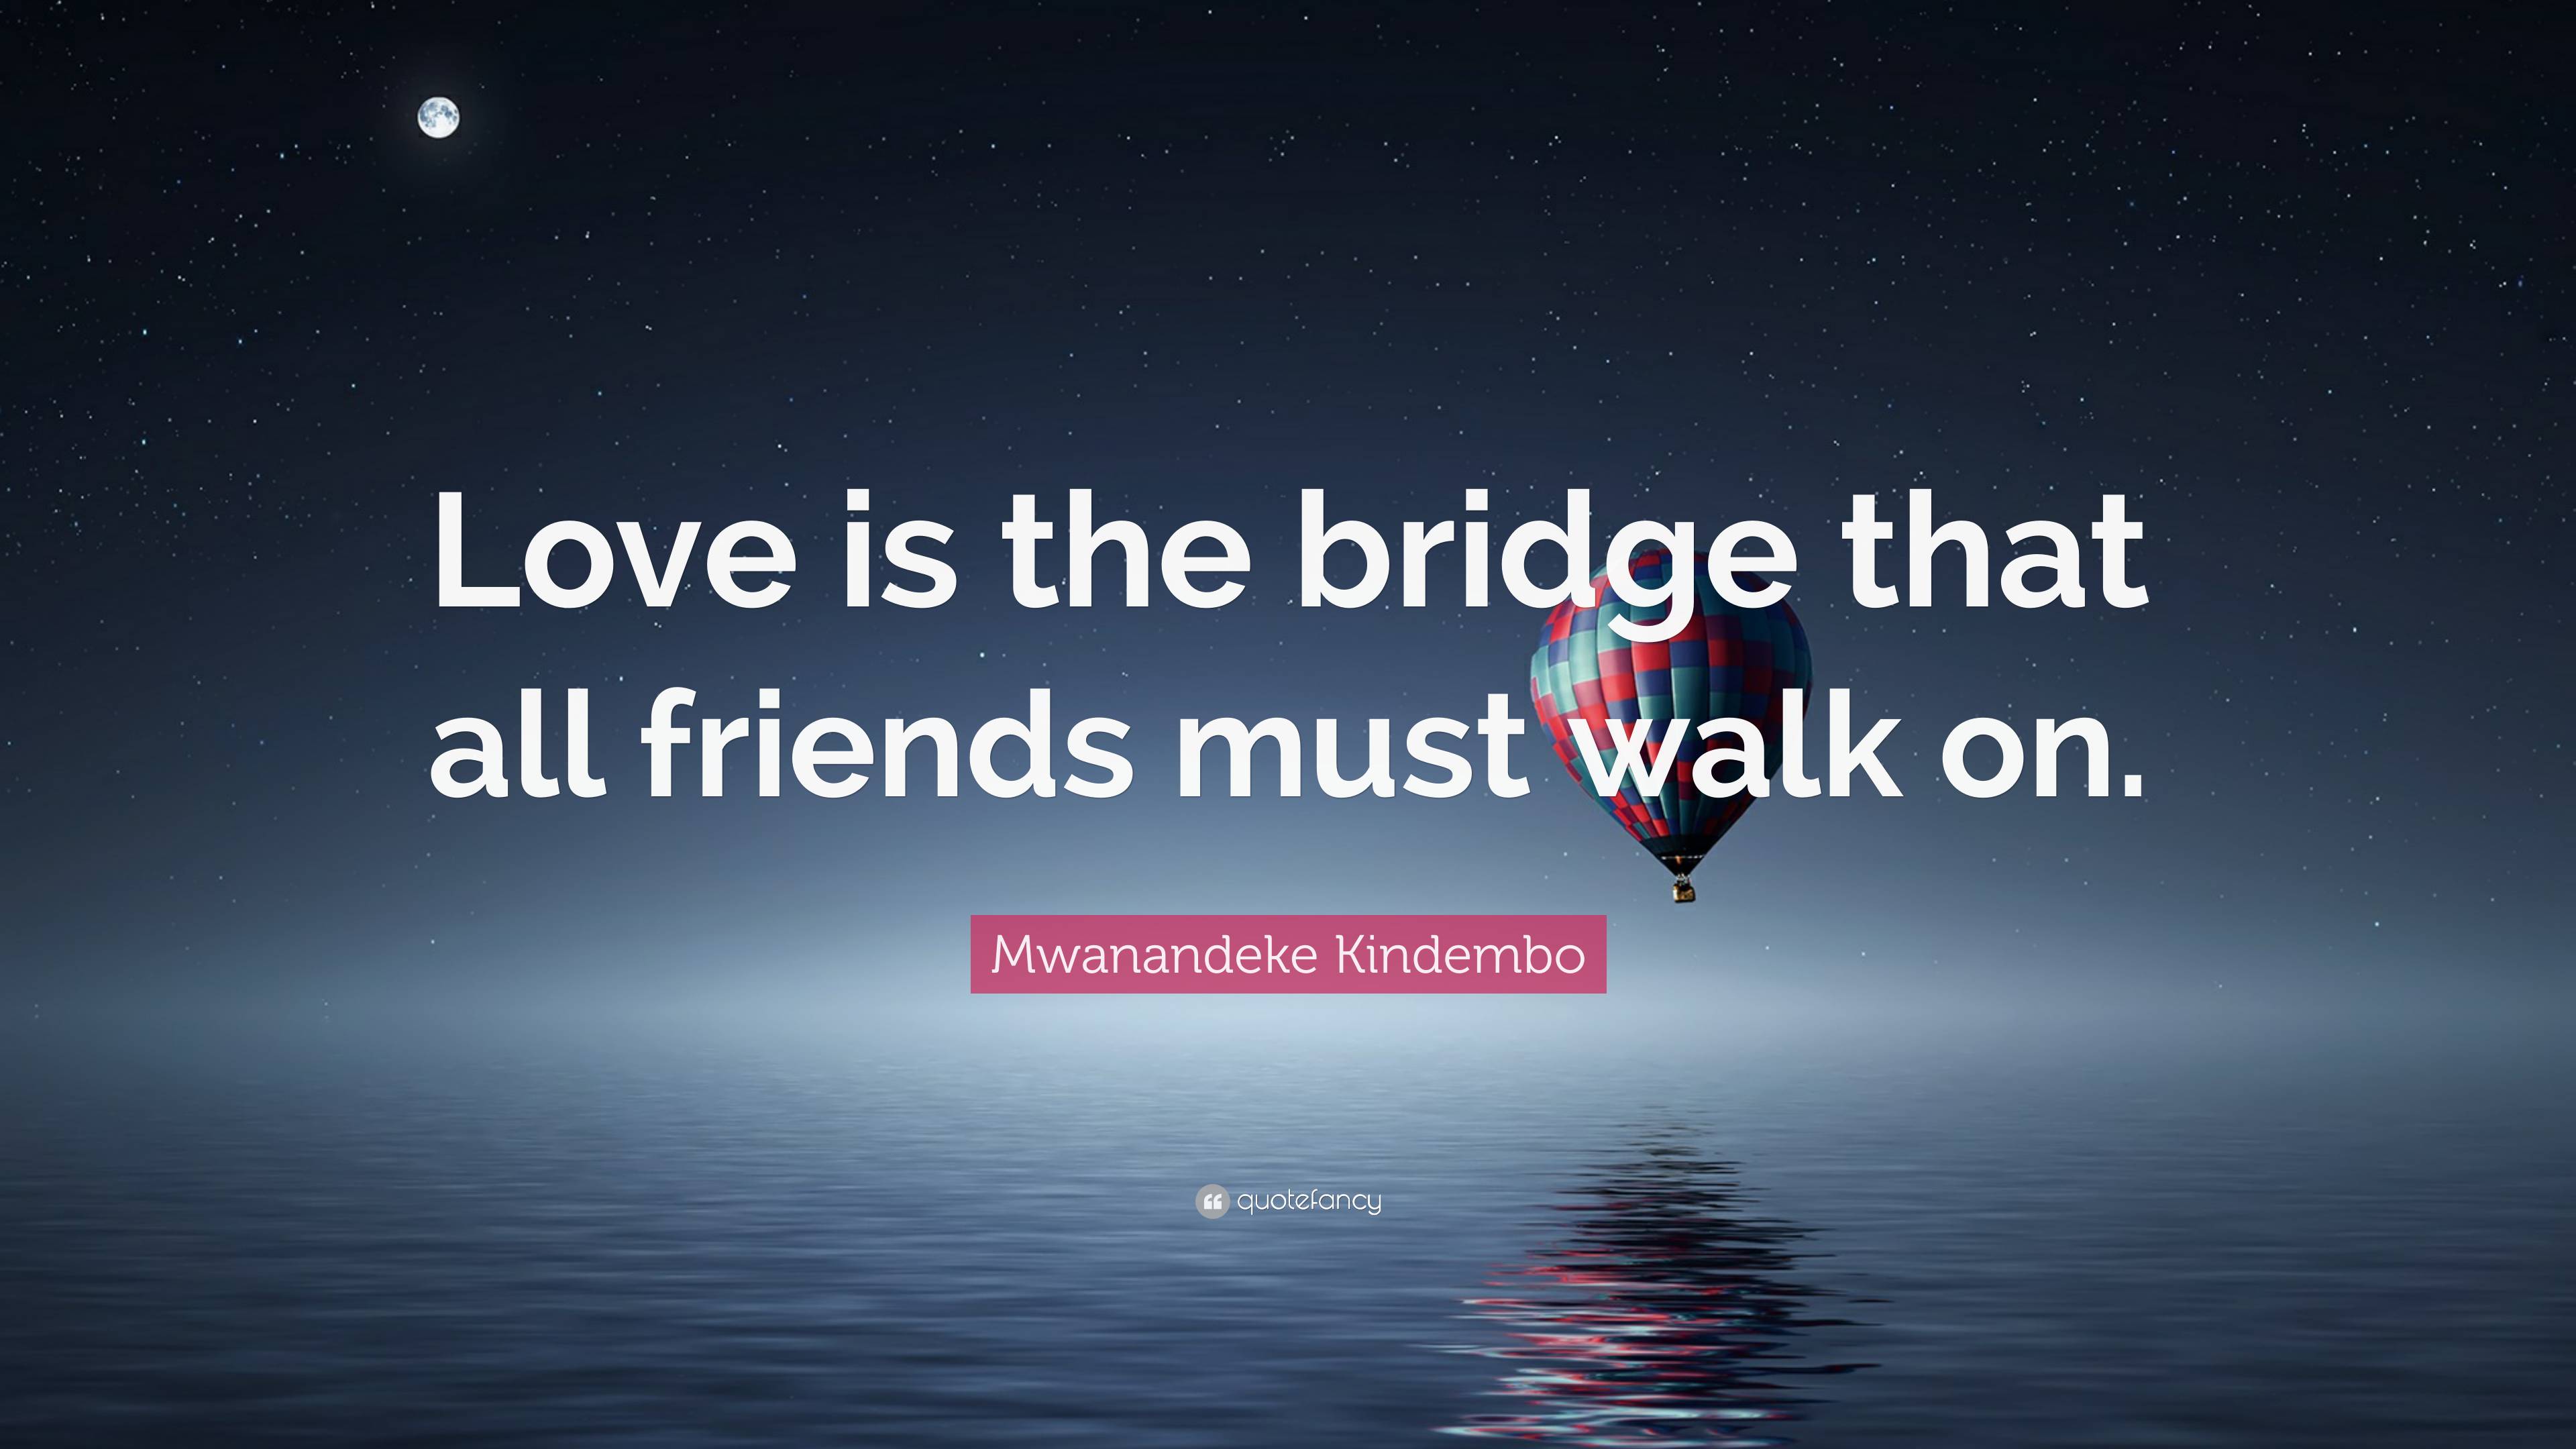 Mwanandeke Kindembo Quote: “Love is full of peace and rage. It's